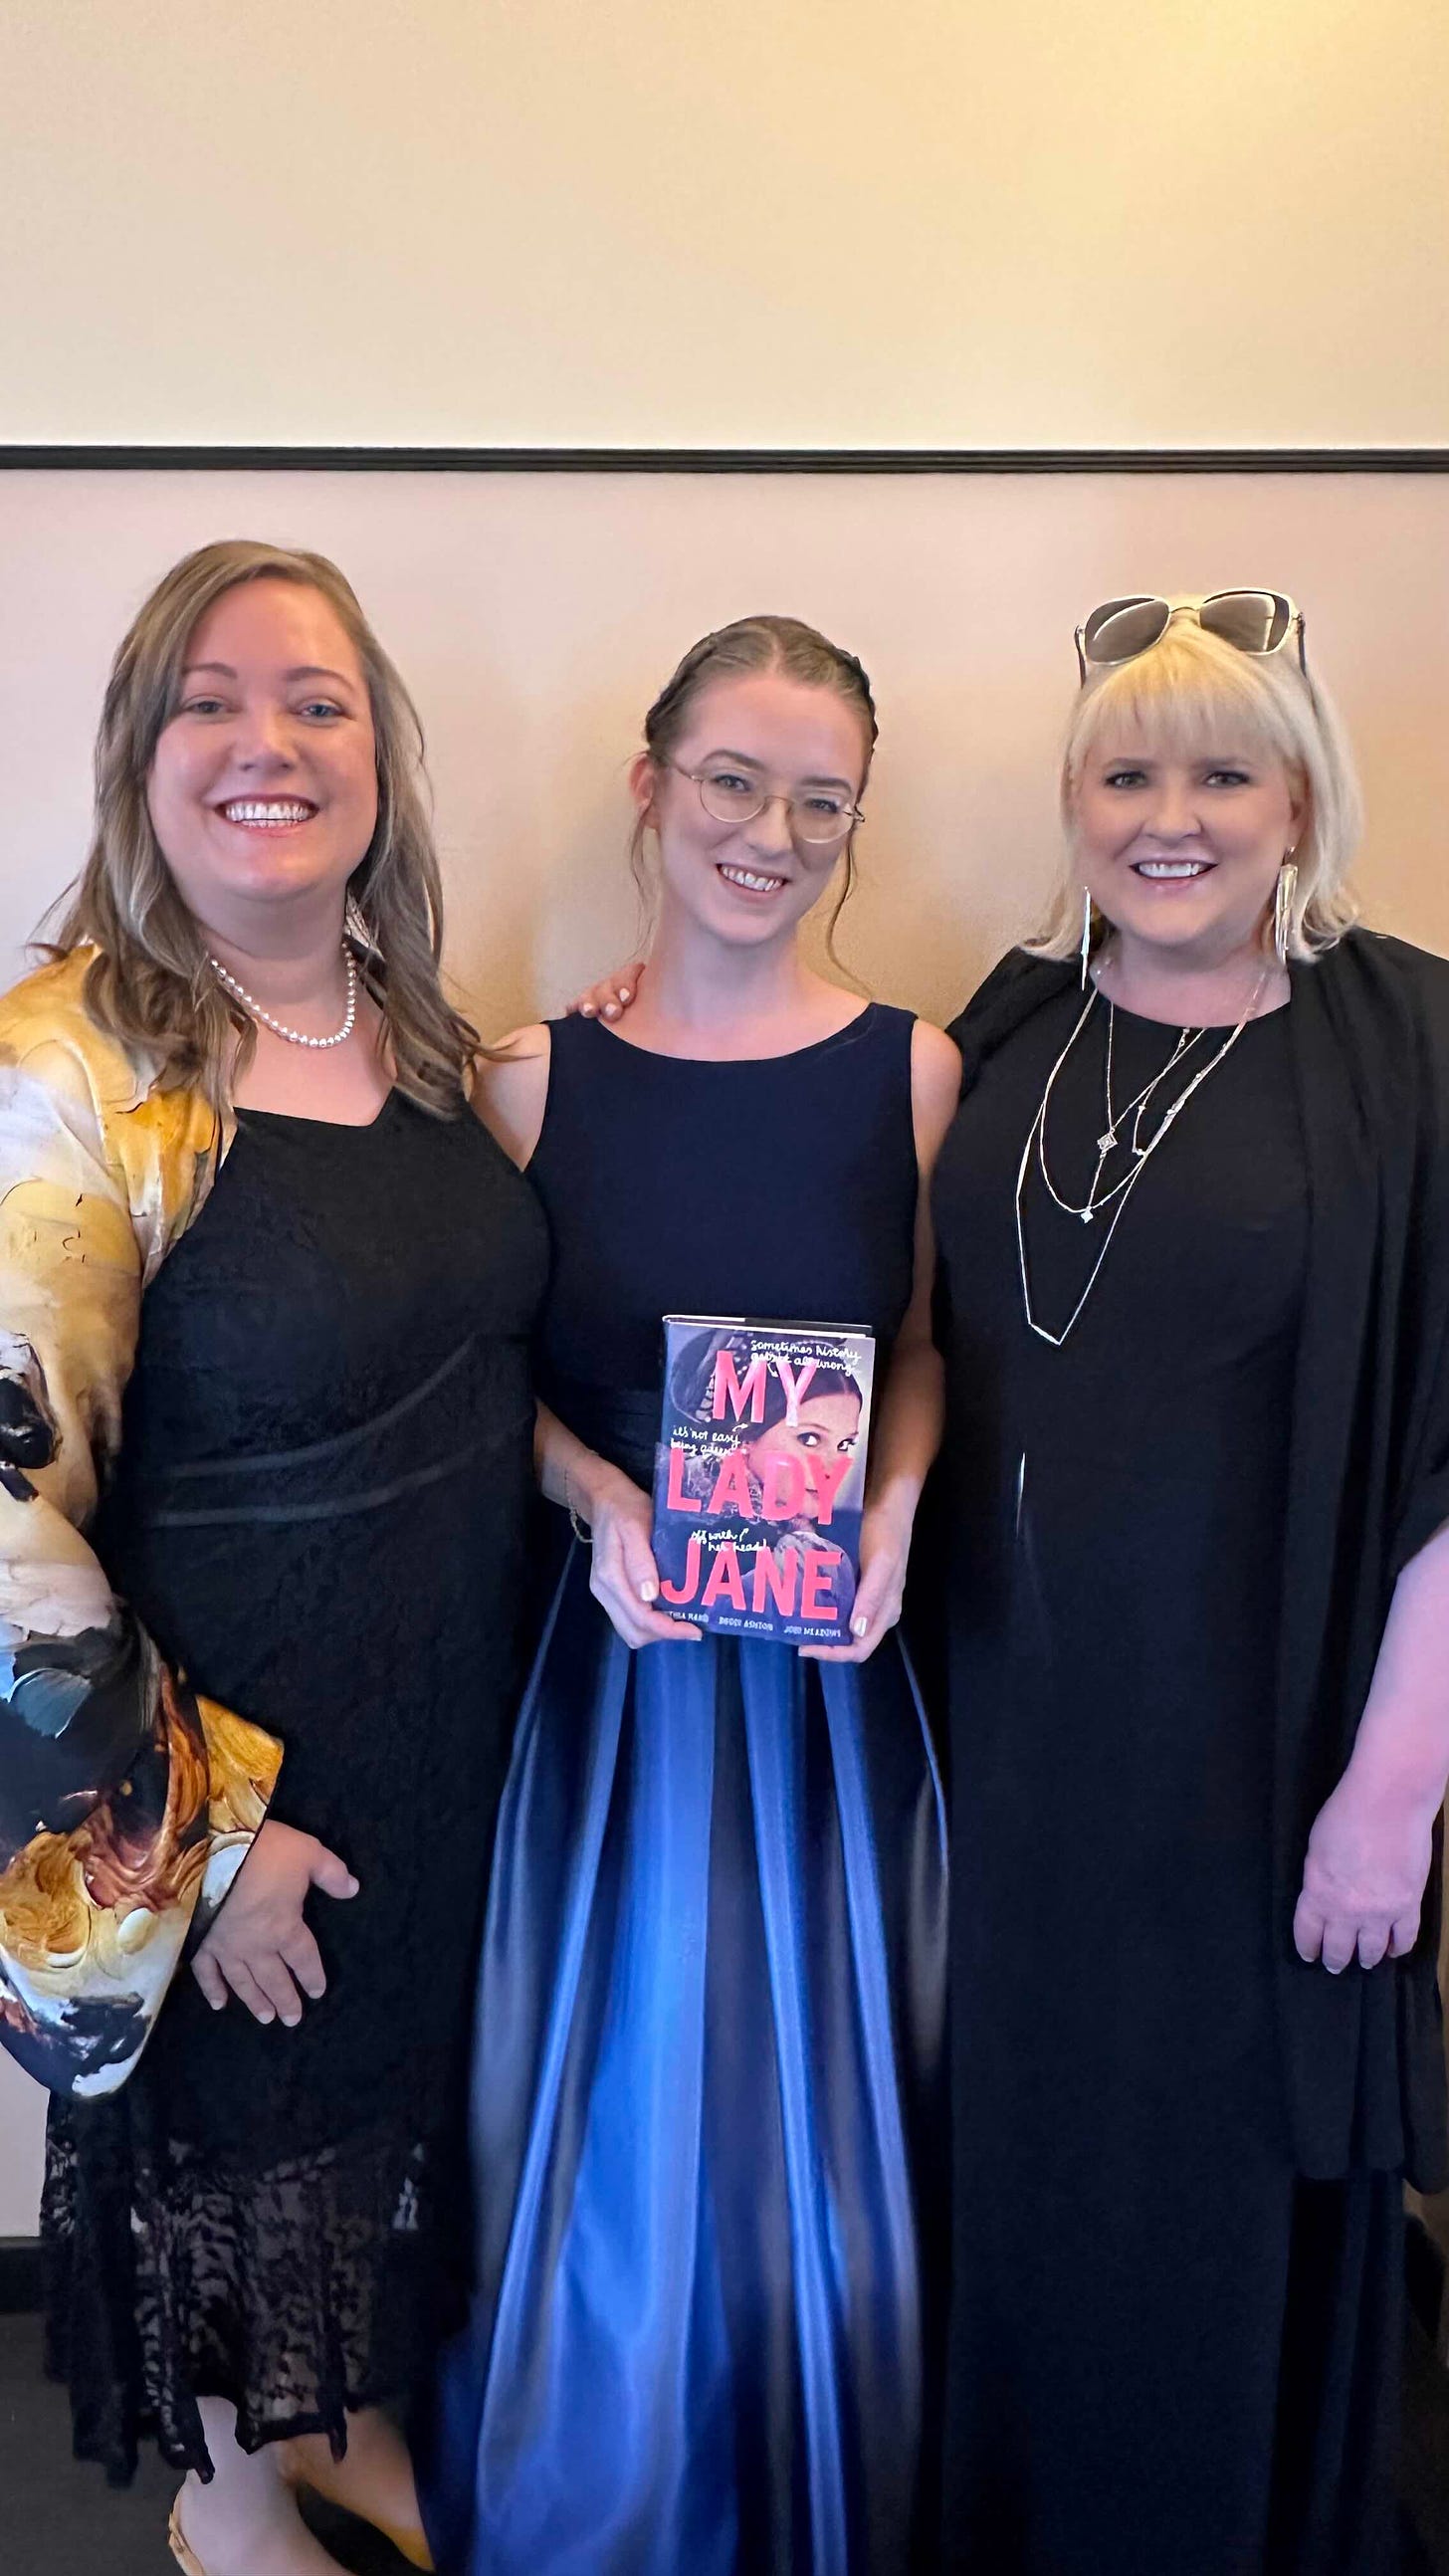 Janies all dressed up: Cynthia is wearing a black dress and a yellow and black silk shawl; Jodi is wearing a blue dress and holding the book; Brodi is wearing a black dress and many necklaces.